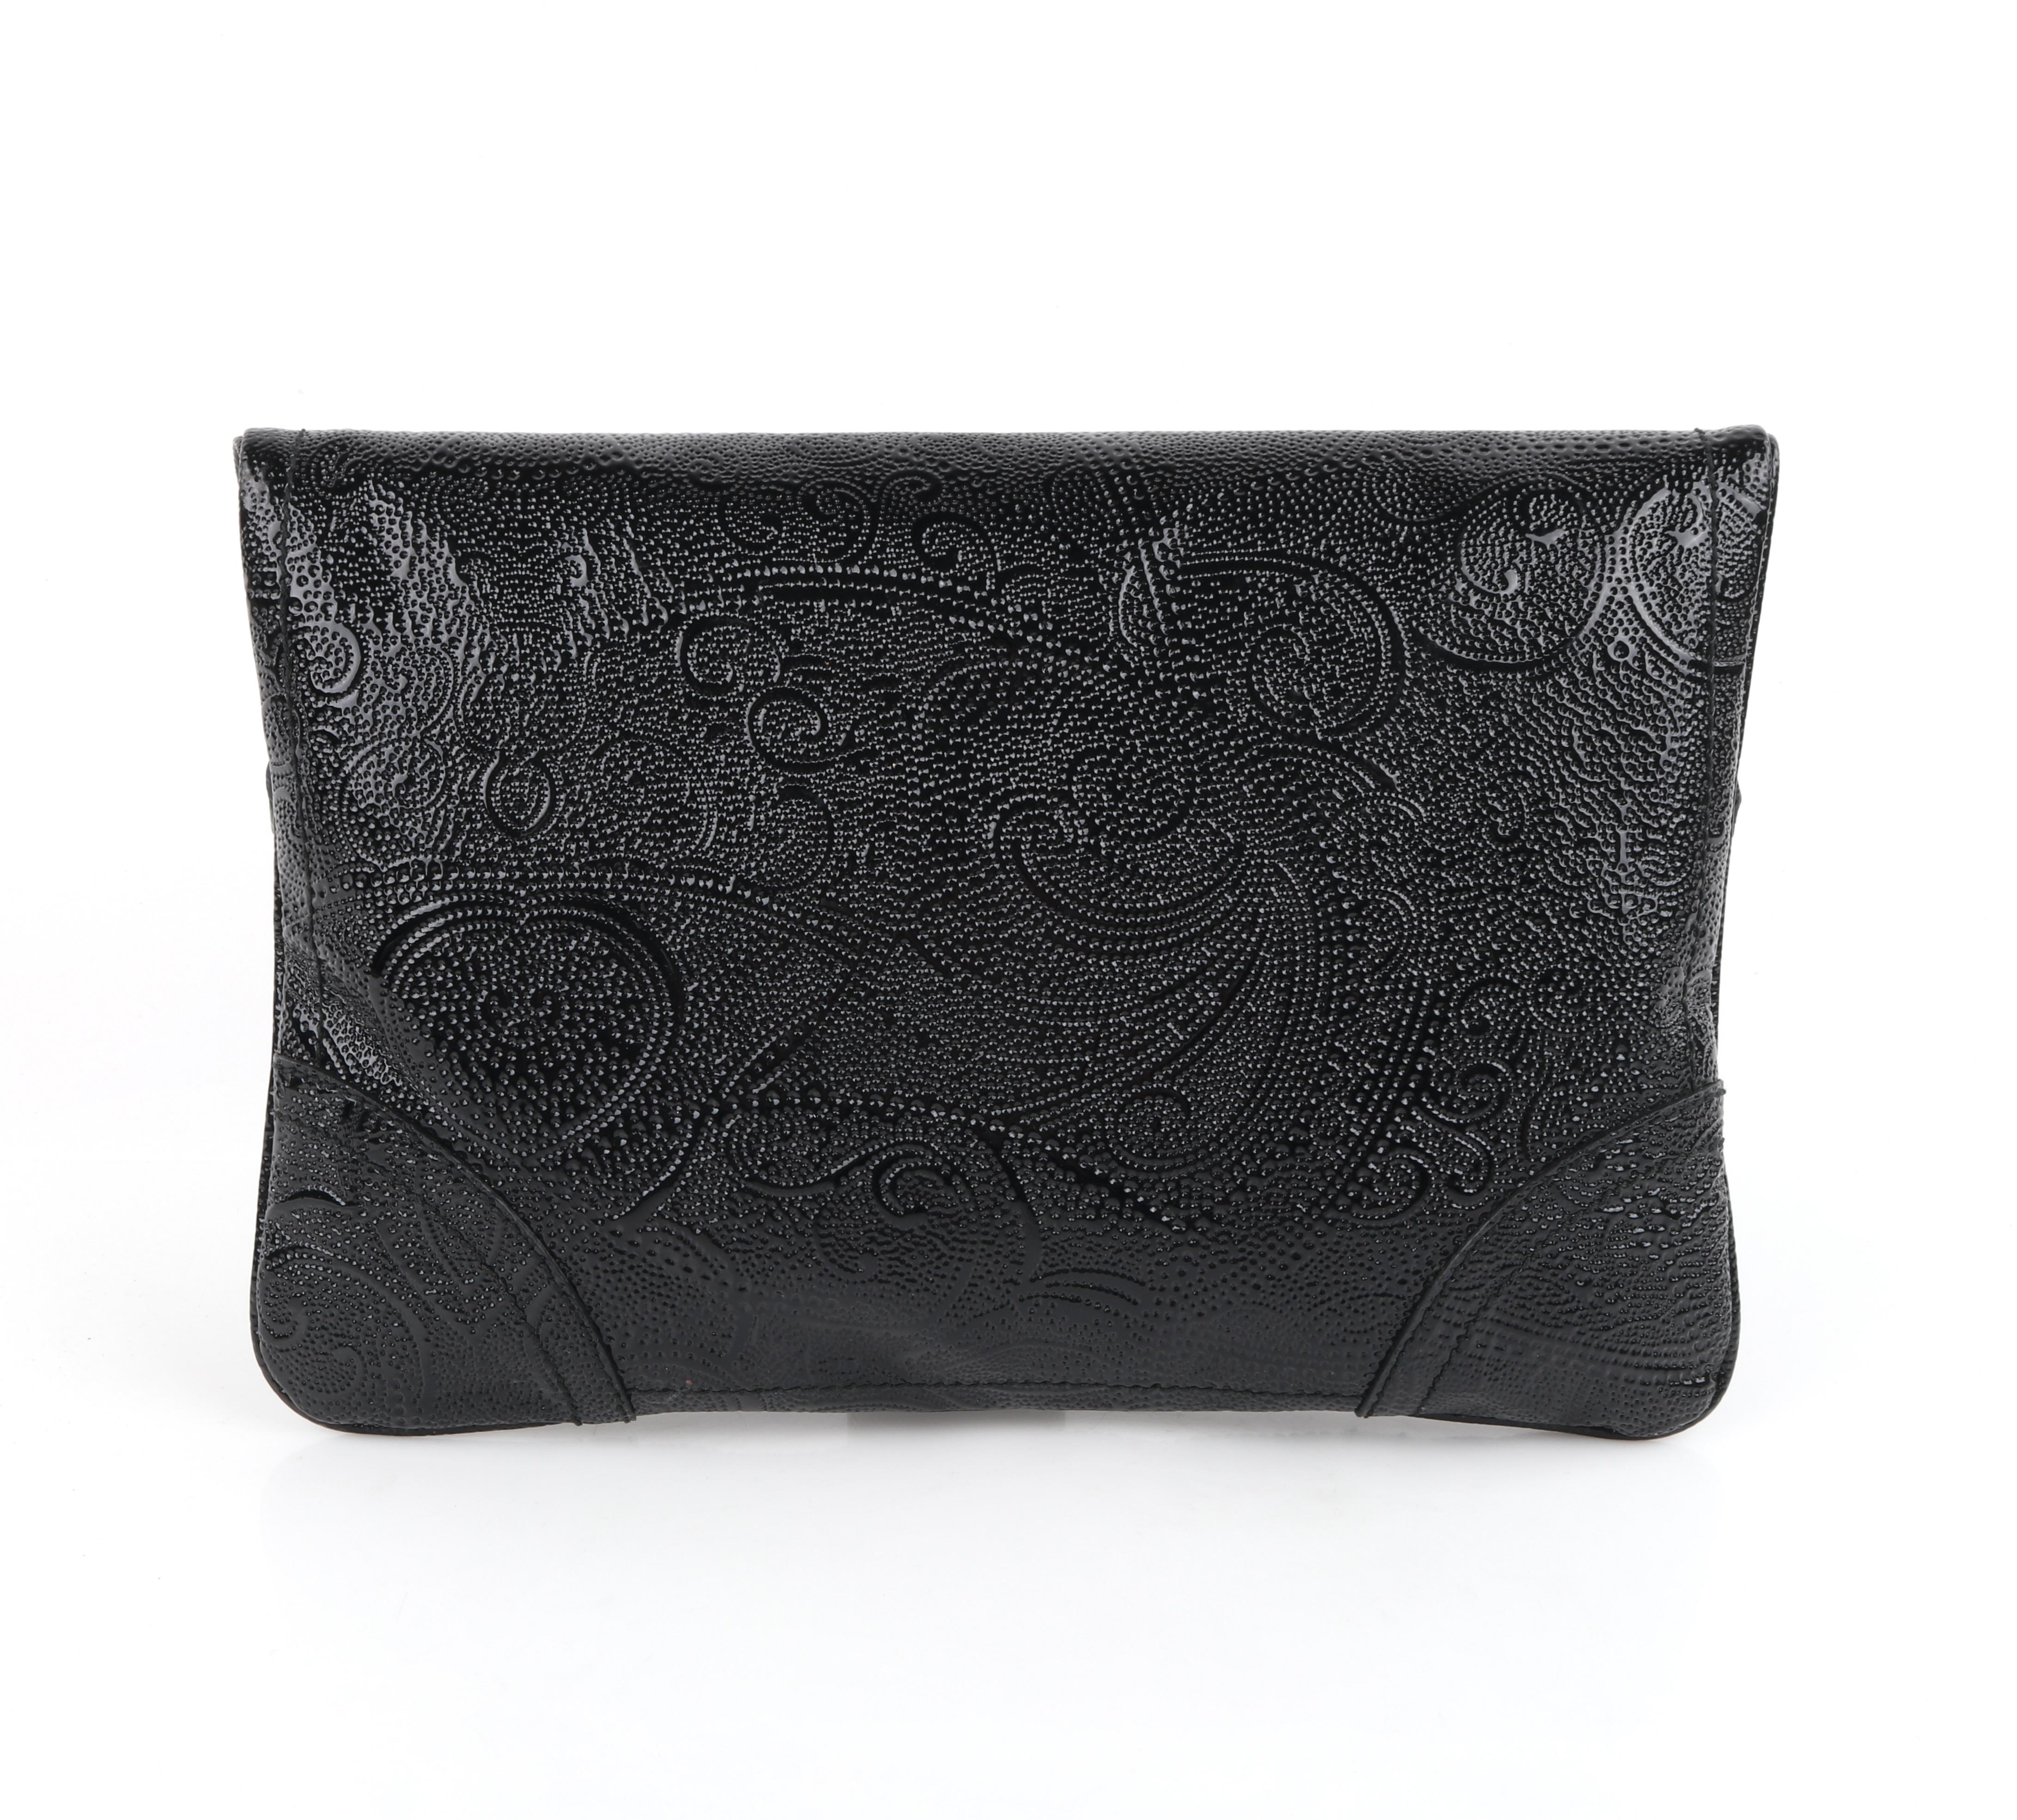 ALEXANDER McQUEEN c.2008 Black Leather Paisley Embossed Large Clutch Purse Bag For Sale 1